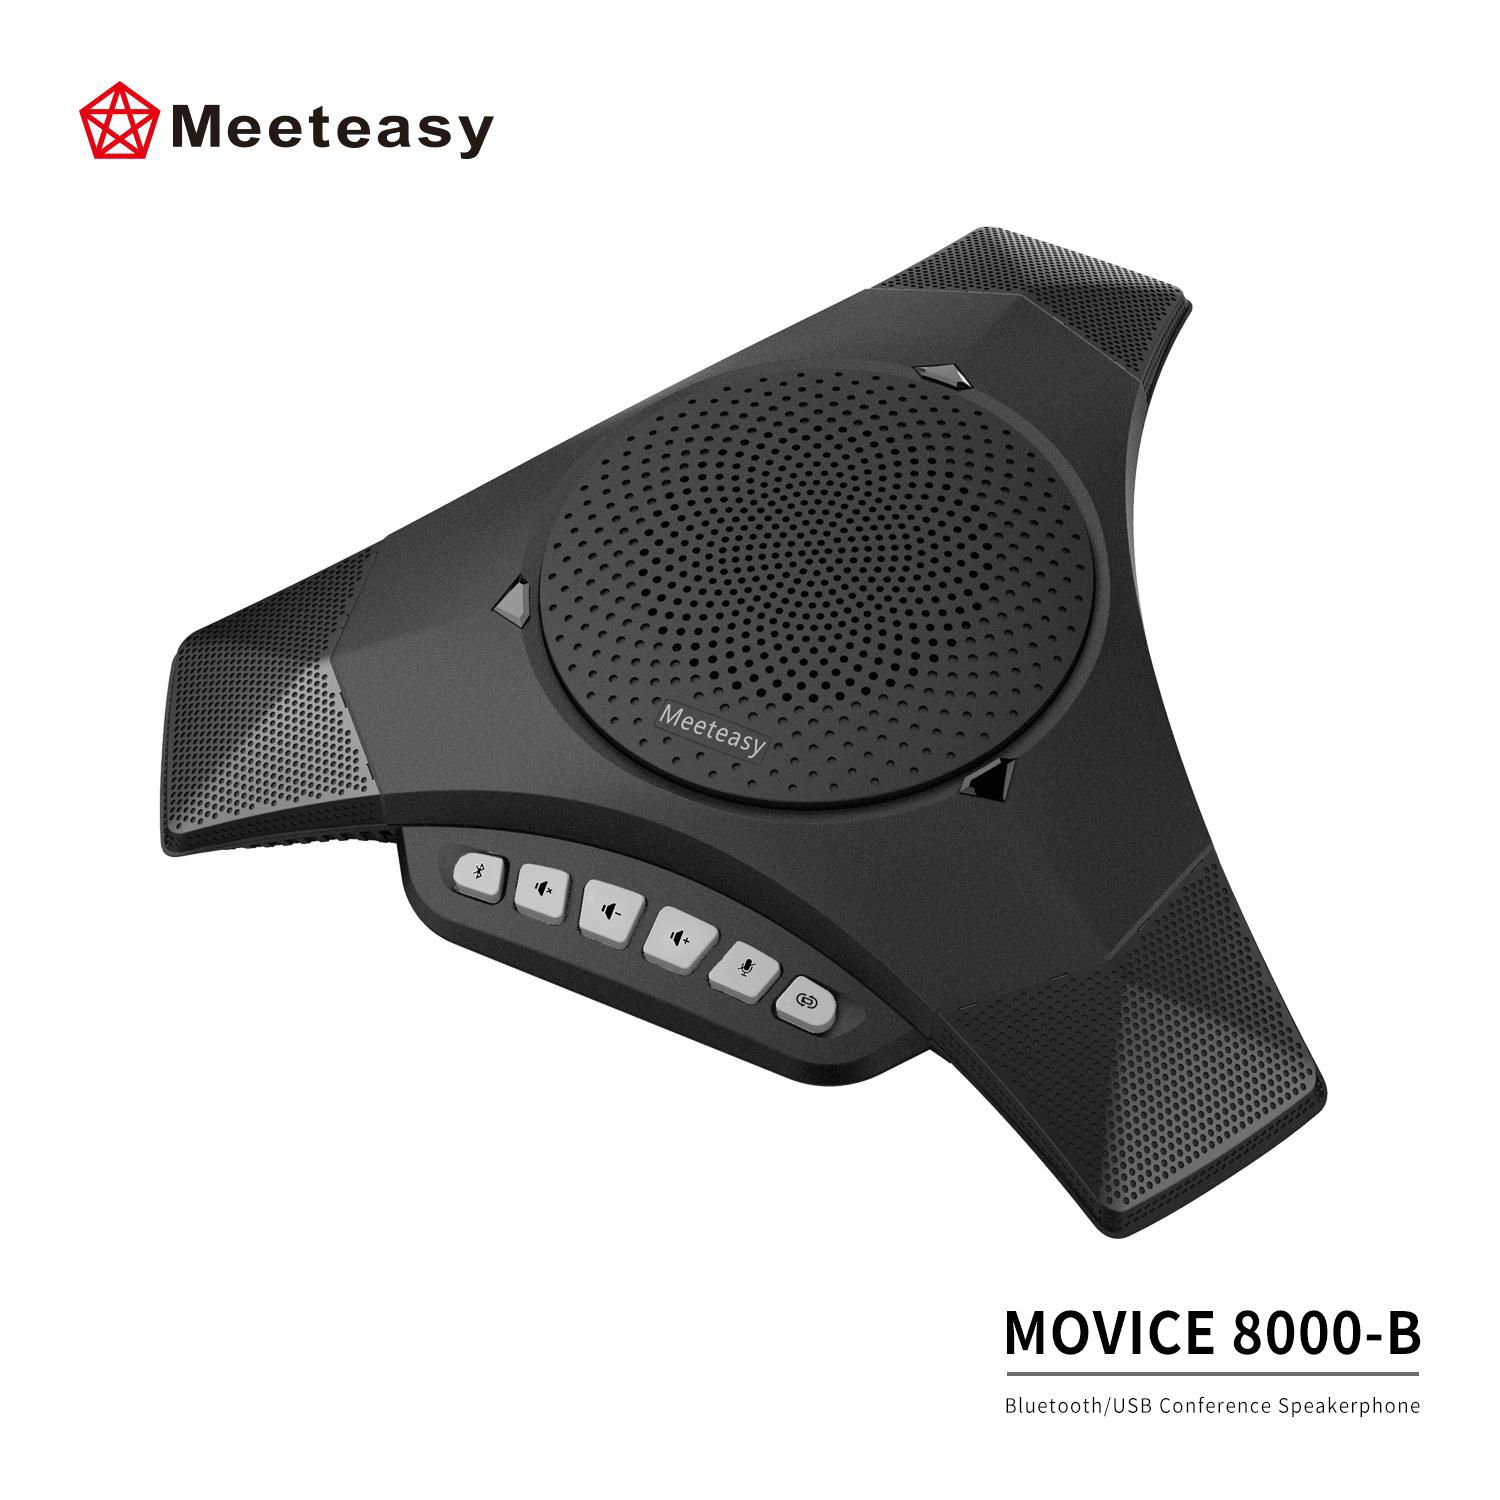 Meeteasy MVOICE 8000-B BT Conference Speakerphone for Web Based Conferencing